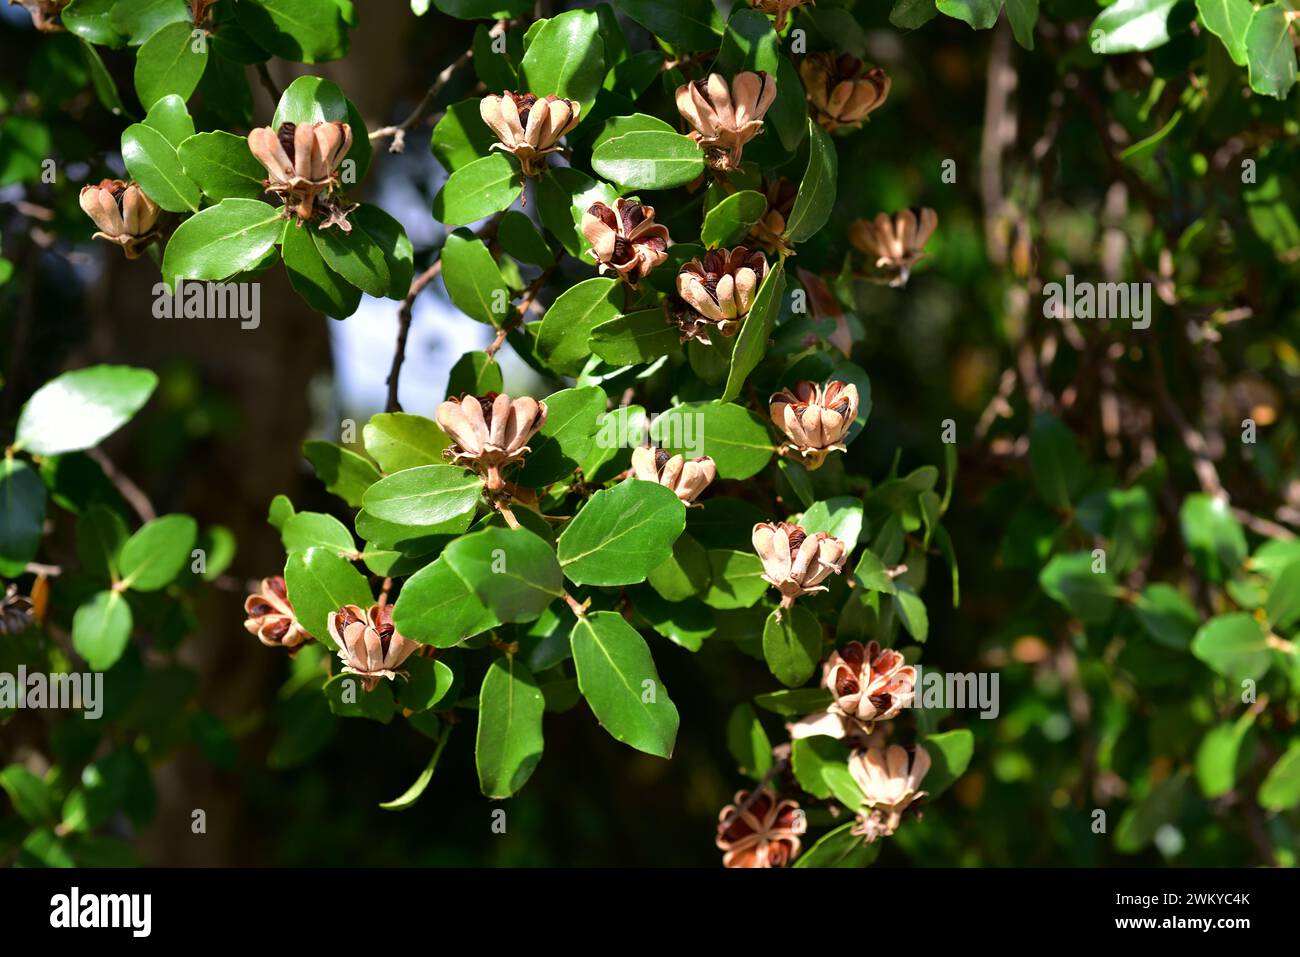 Soap bark tree (Quillaja saponaria) is an evergreen tree endemic to central Chile. Its bark contains saponin used in cosmetics, pharmacy and industry. Stock Photo